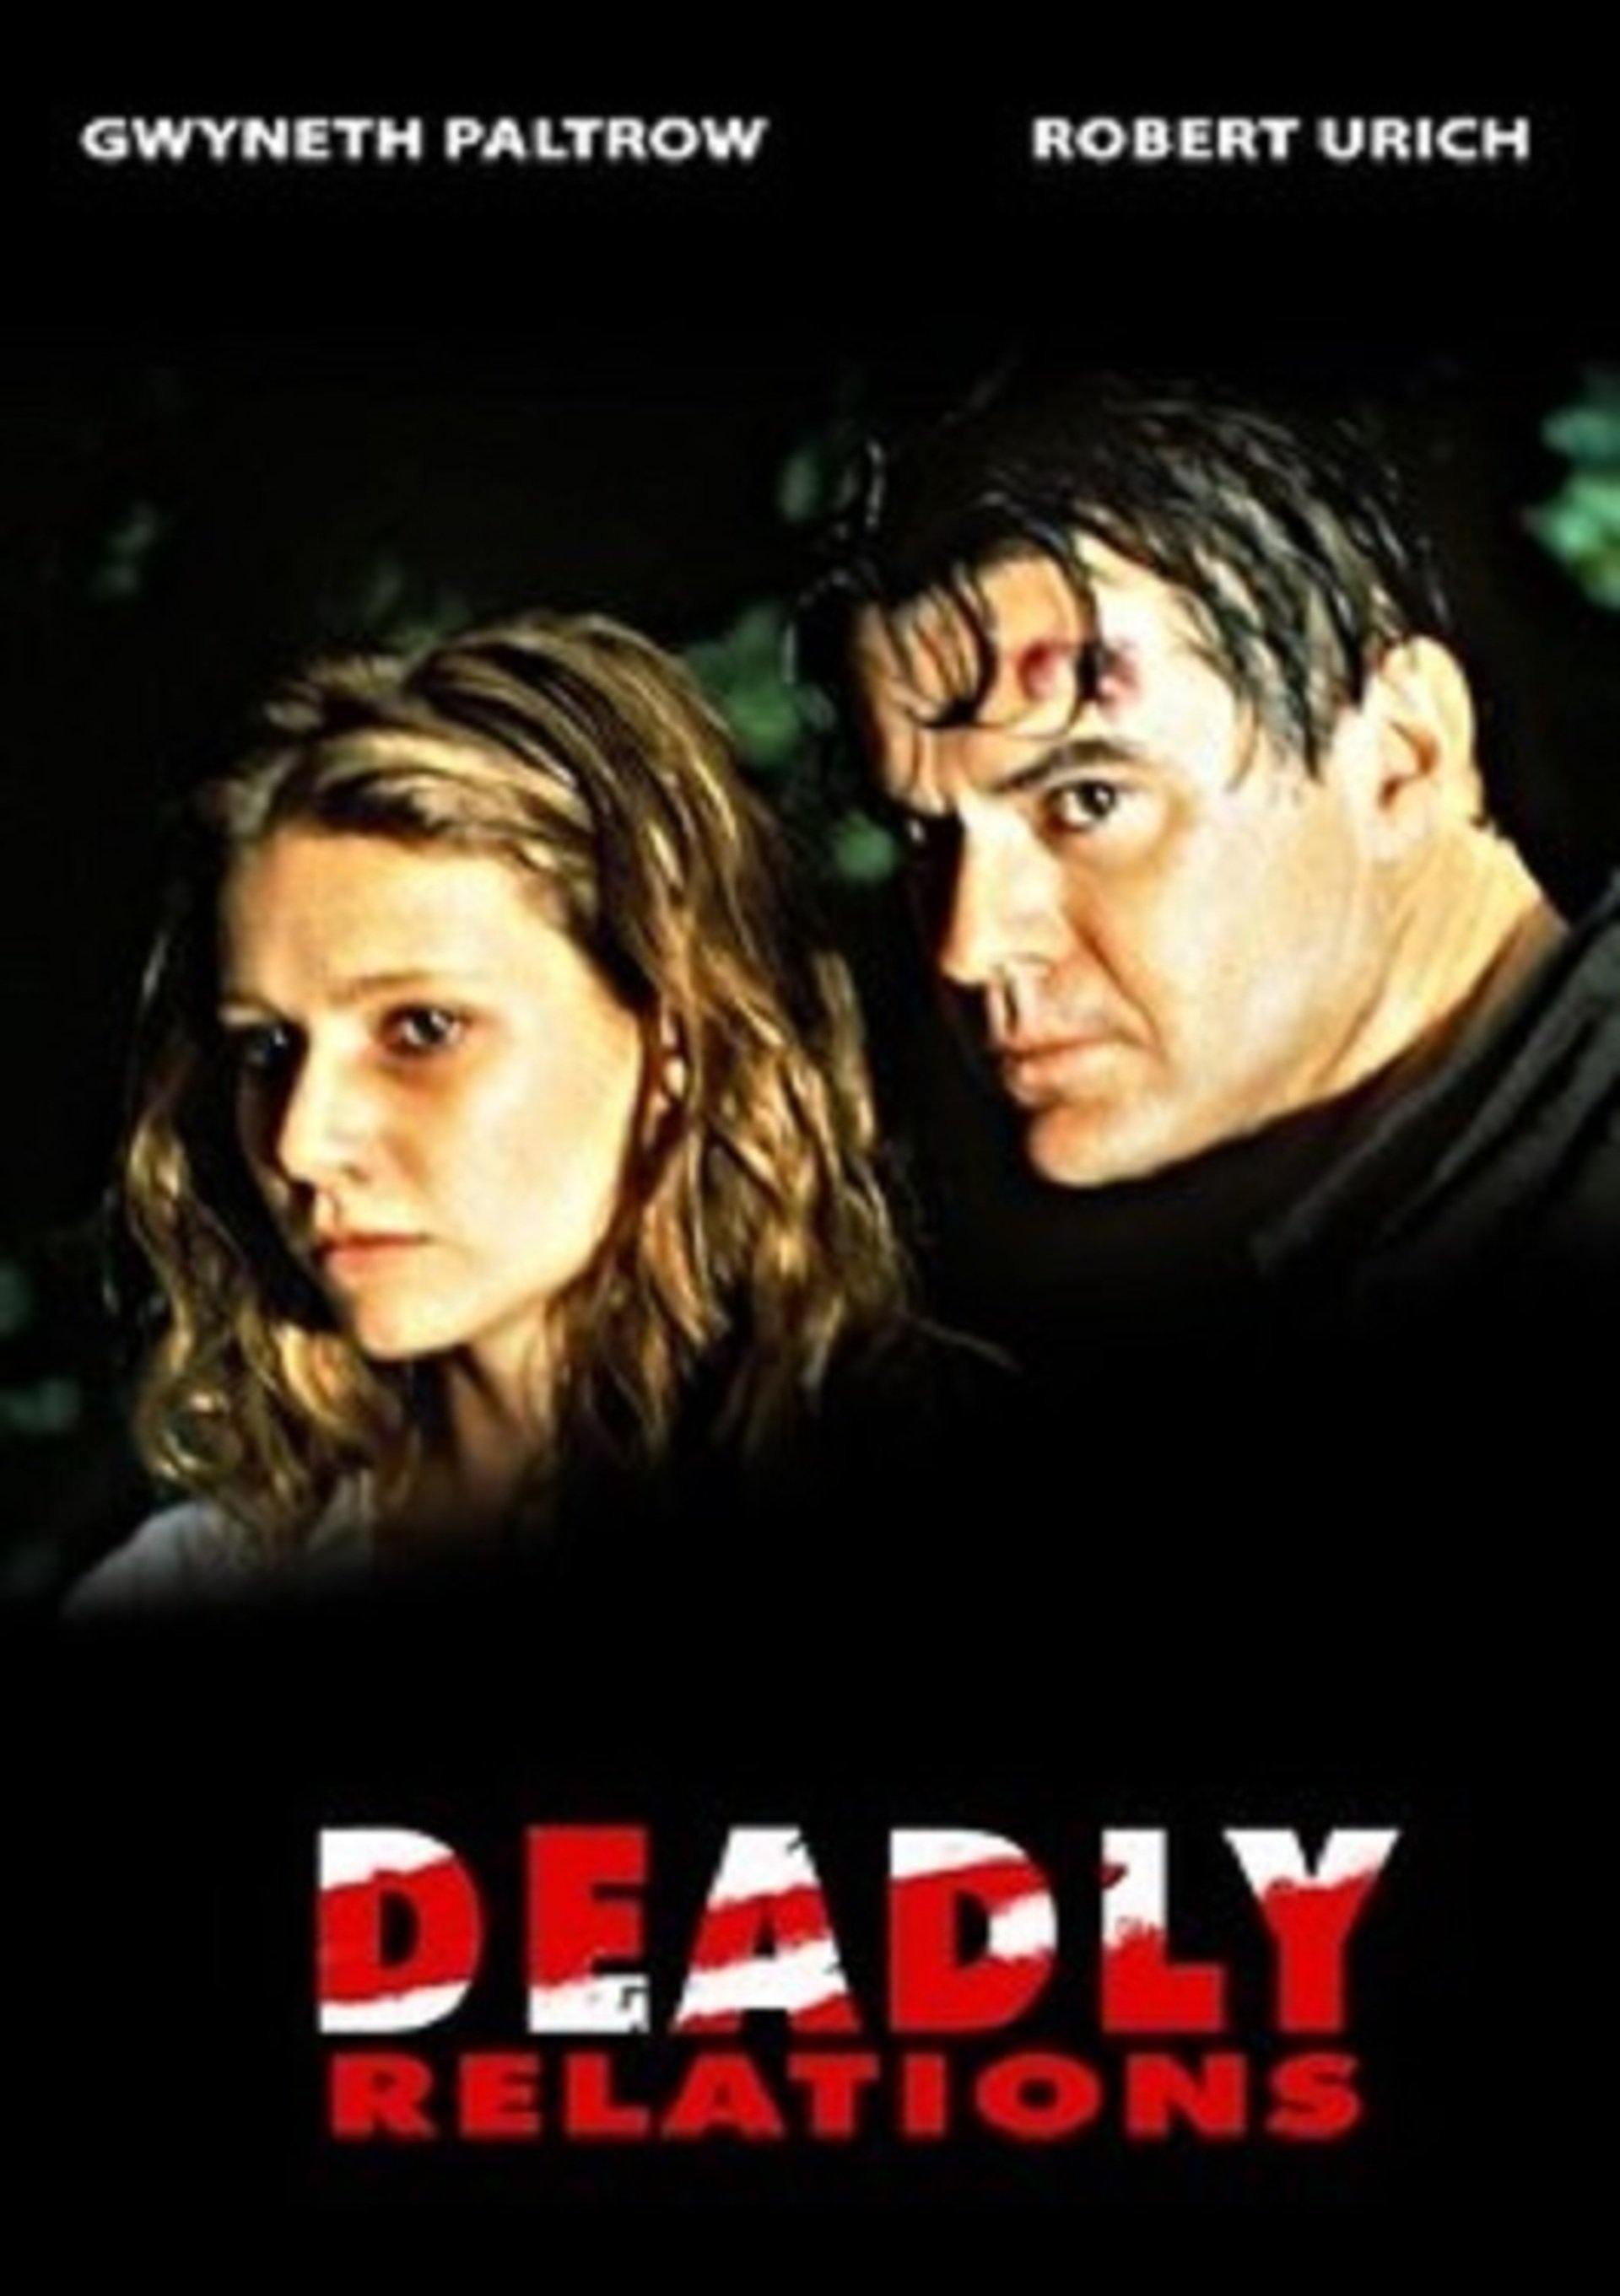 Deadly Relations (1993) starring Robert Urich on DVD on DVD